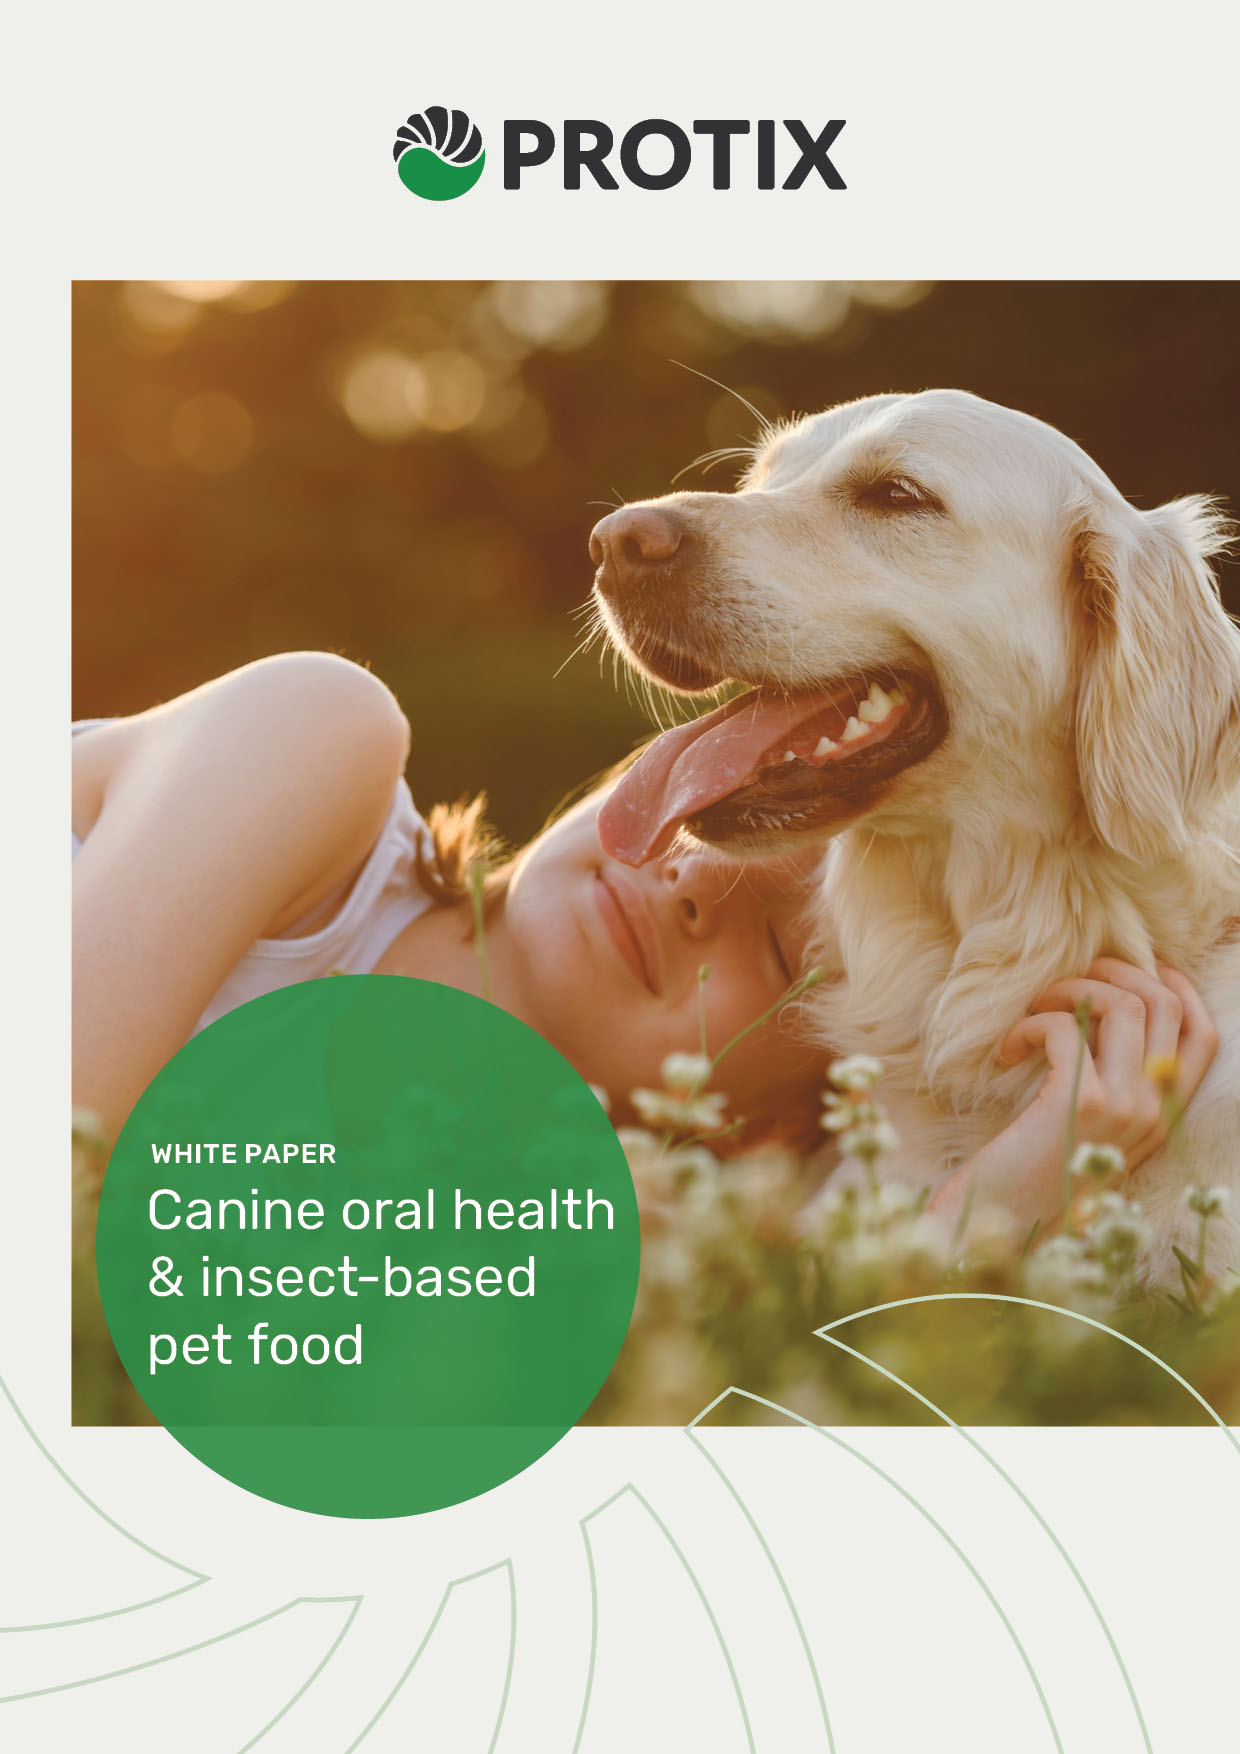 Protix's whitepaper on the oral health benefits insect-based pet foods provide canines